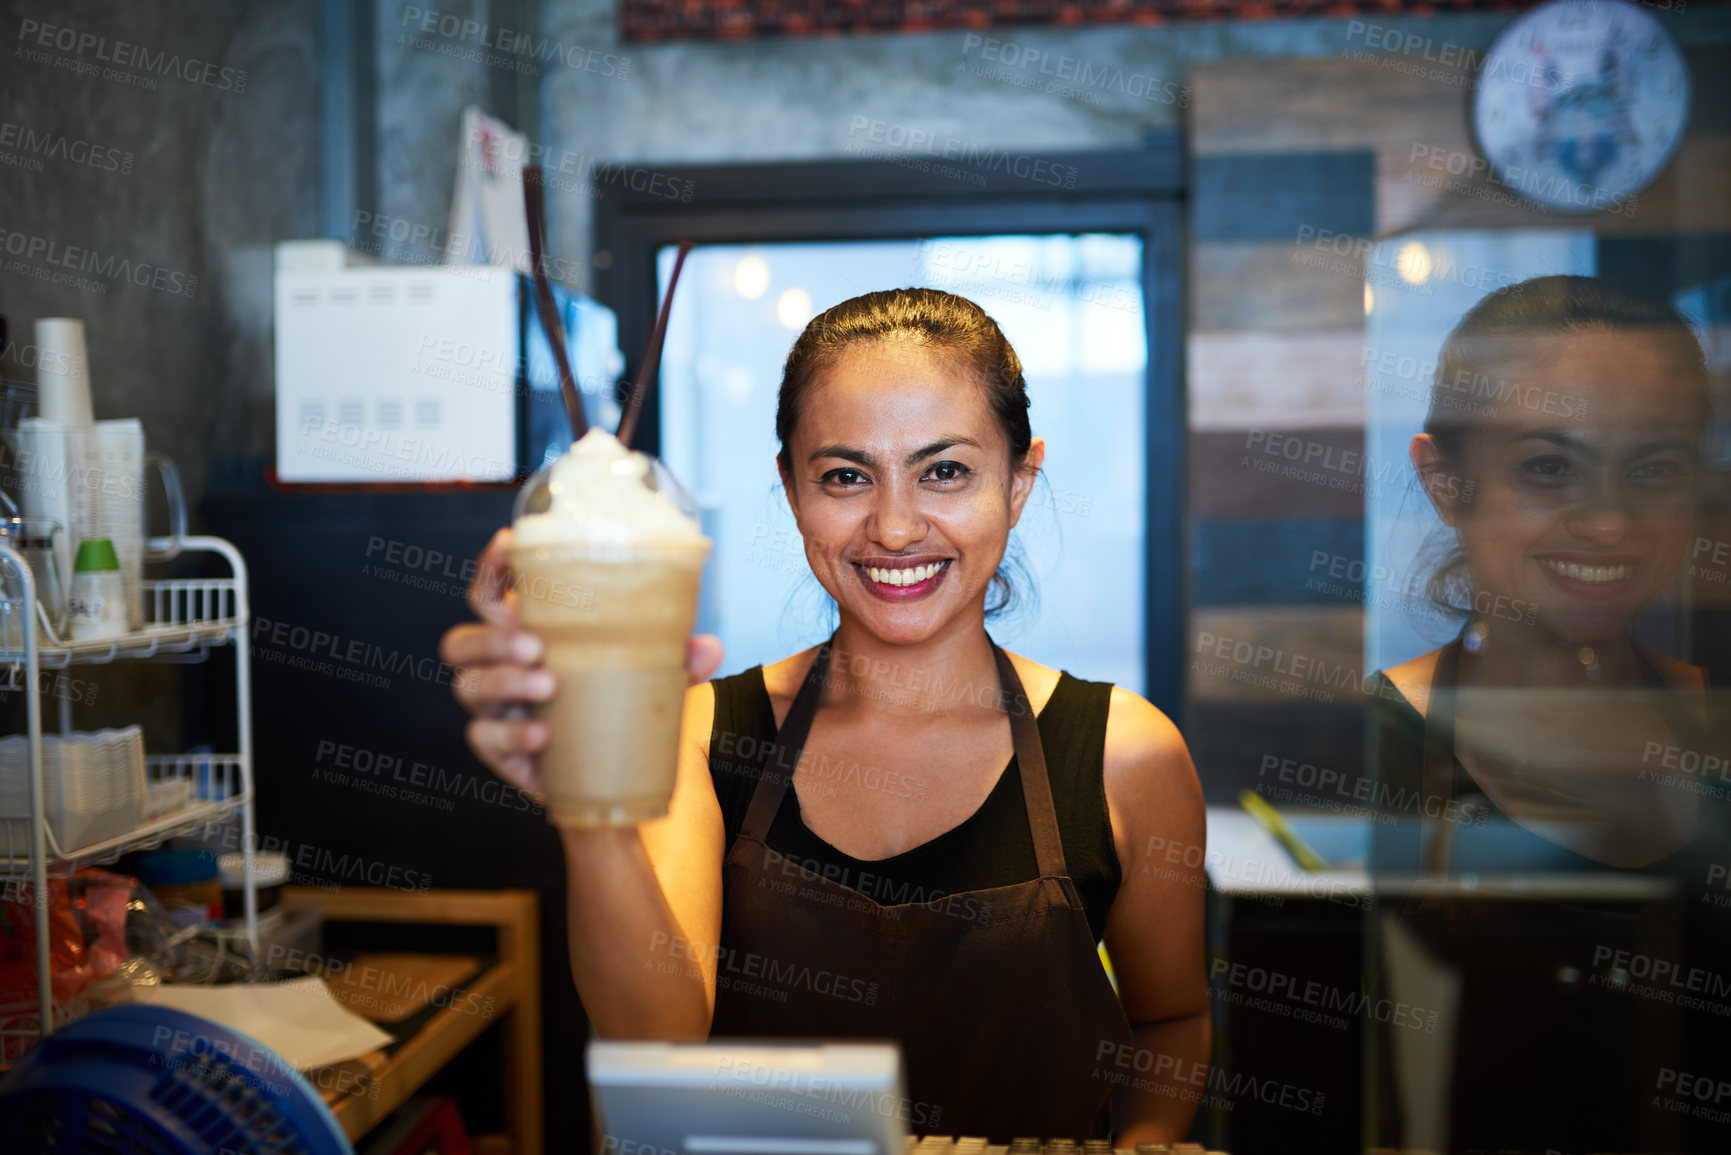 Buy stock photo Portrait of a young barista holding up a chilled coffee beverage in a coffee shop